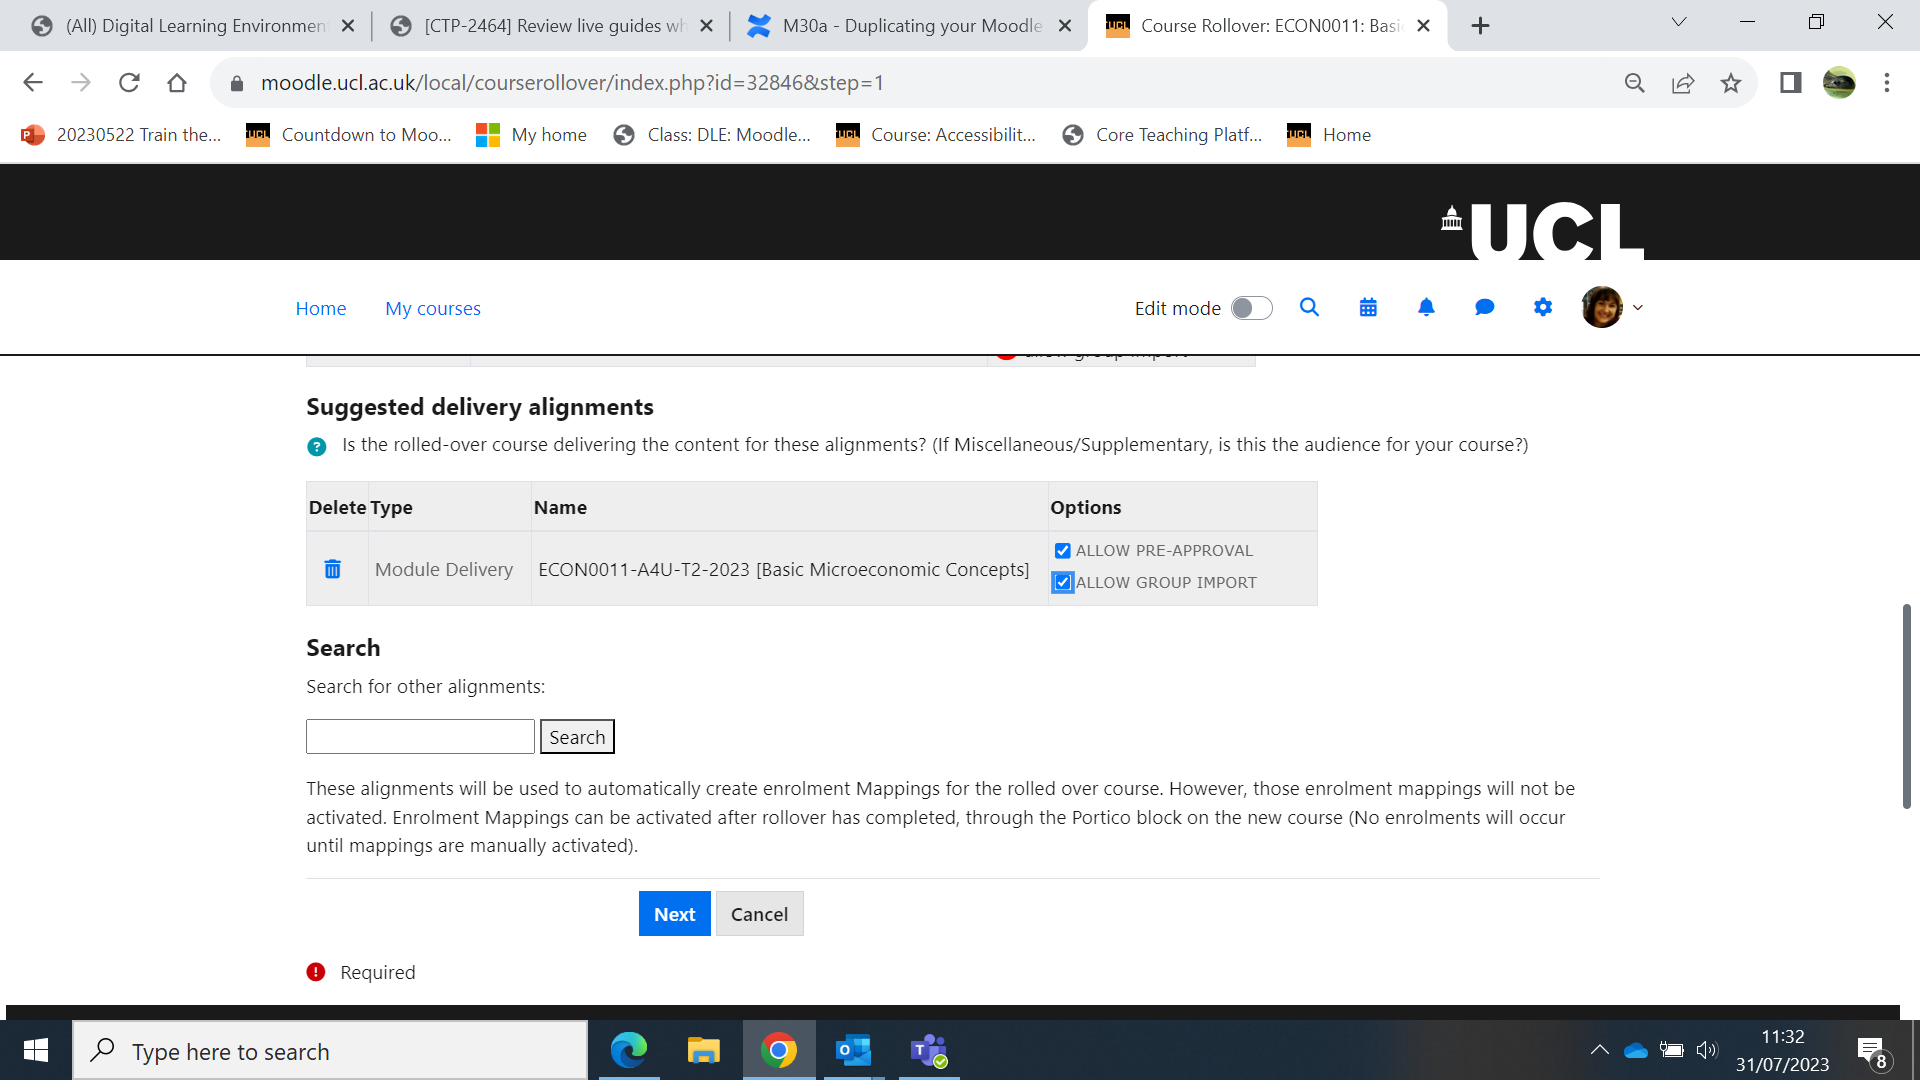 Screen shot of suggest delivery alignments section